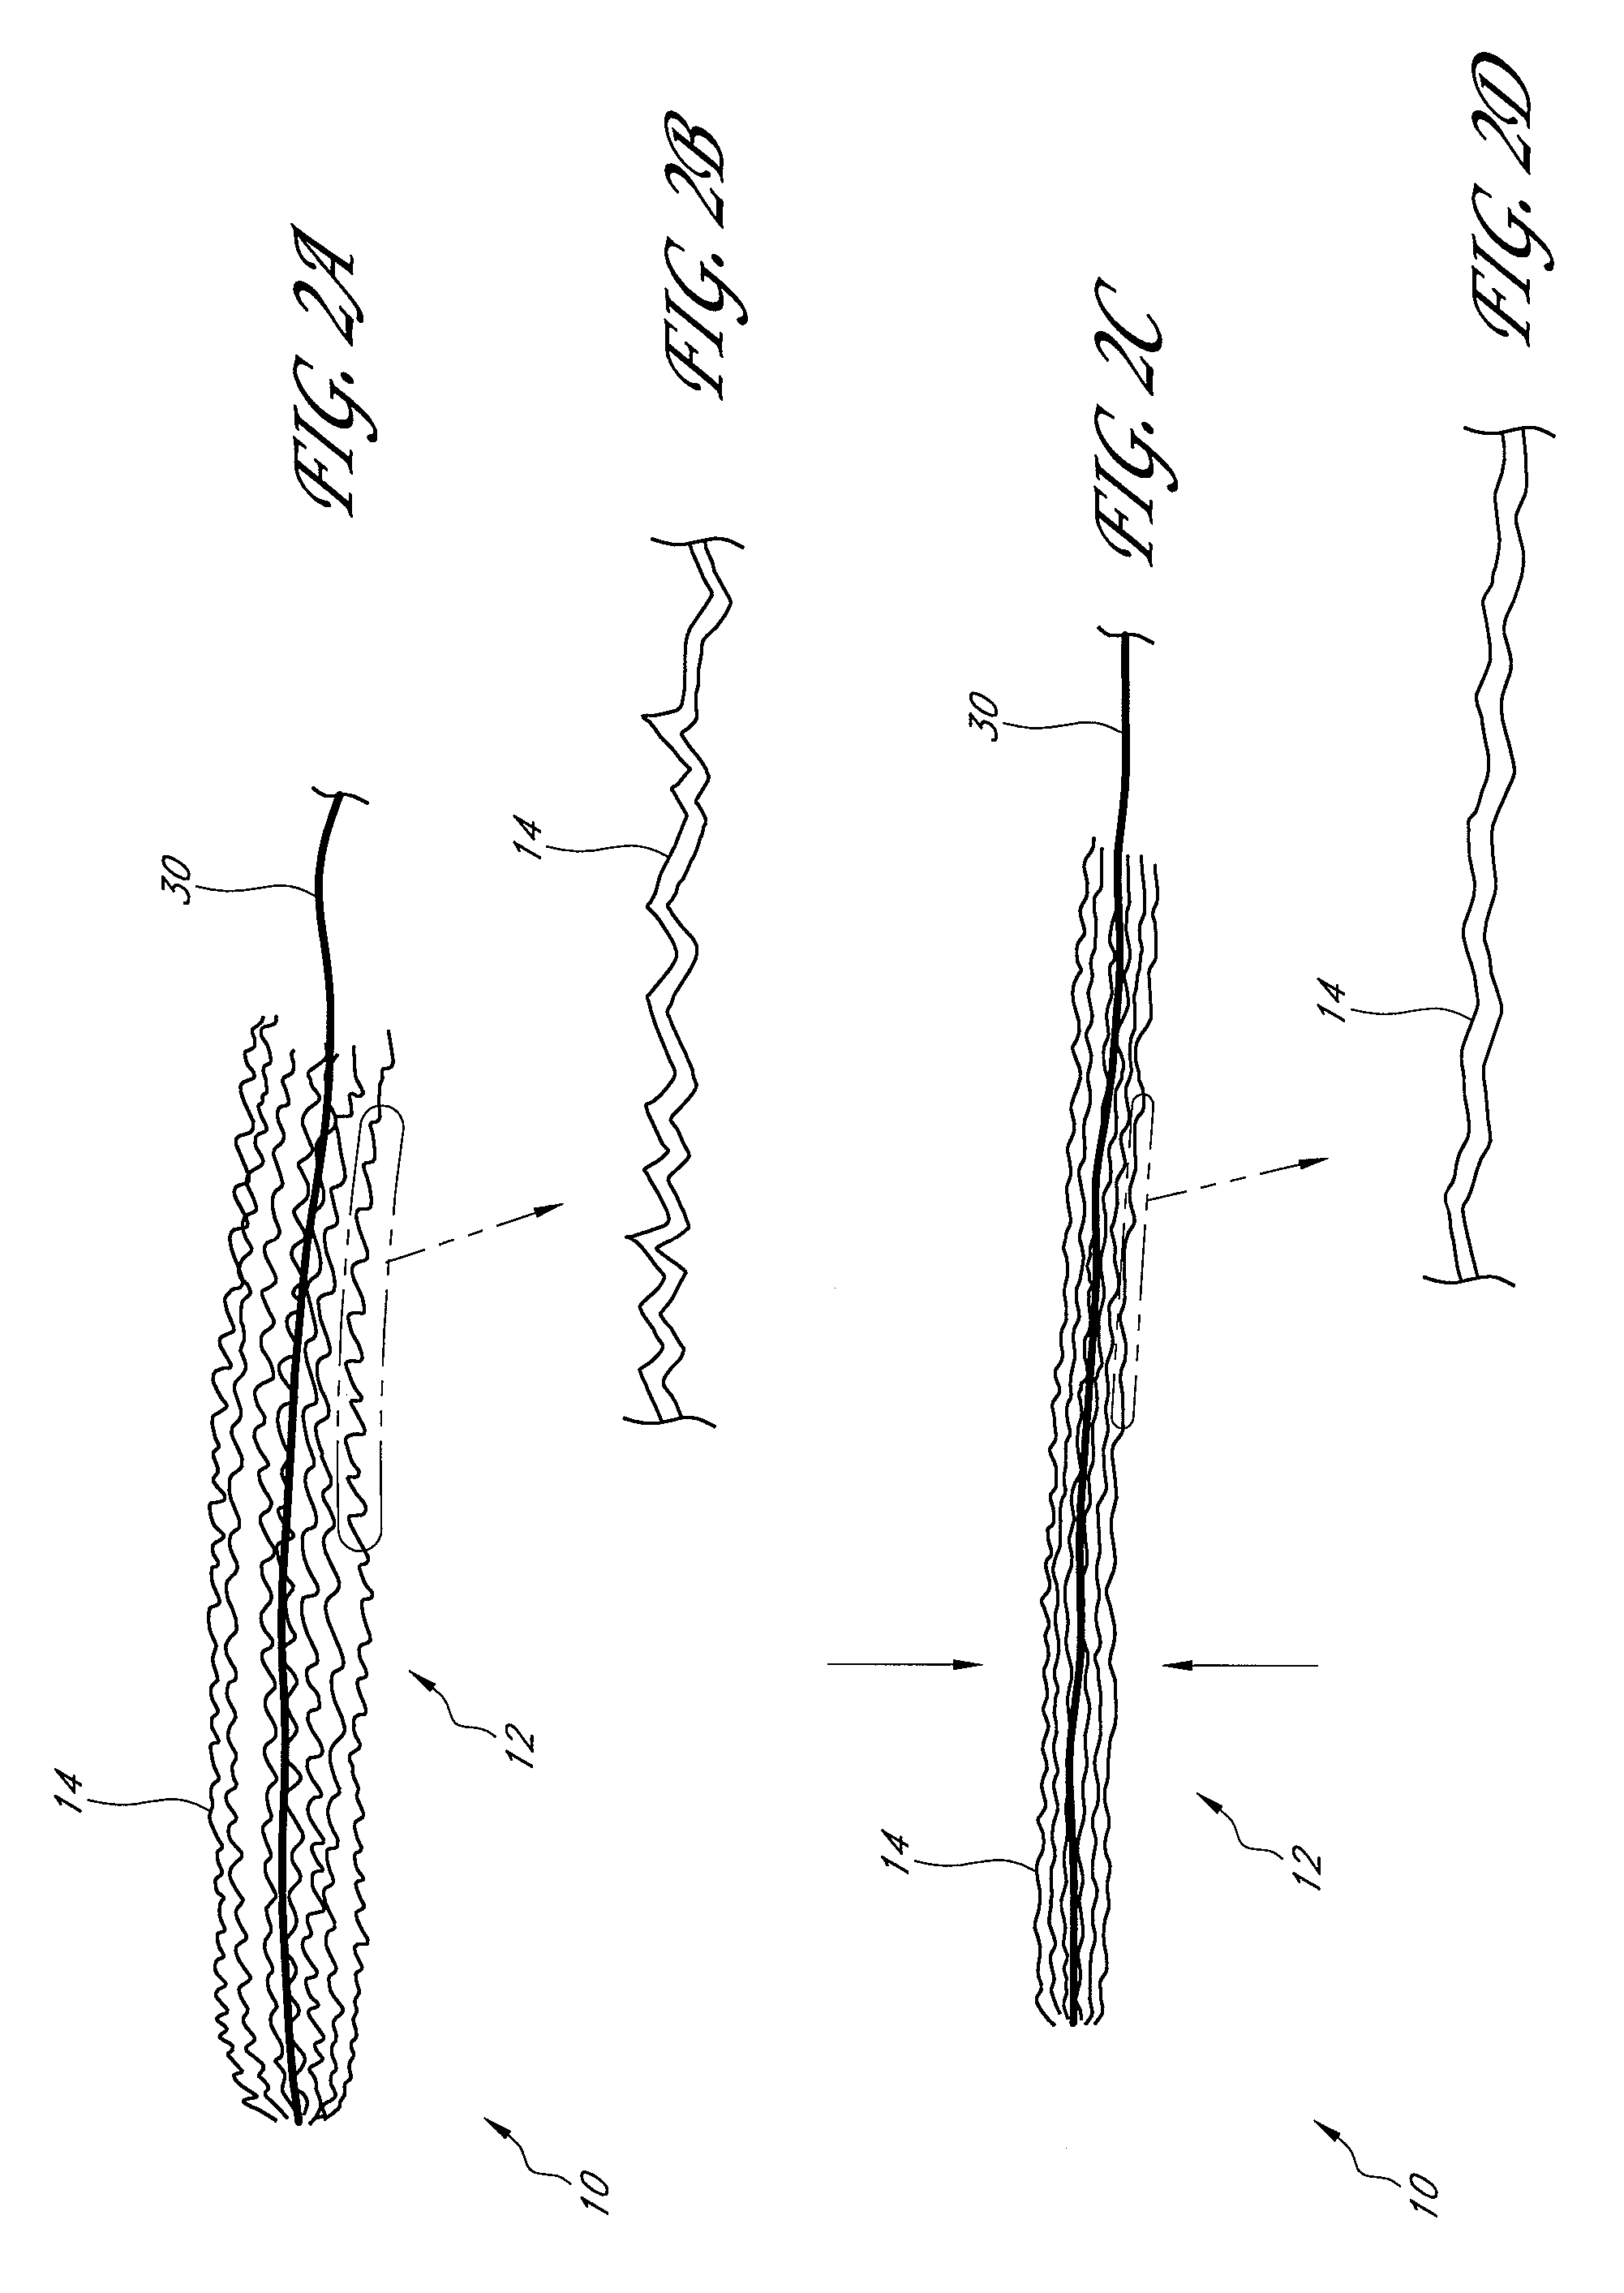 Method and apparatus for implanting an occlusive structure